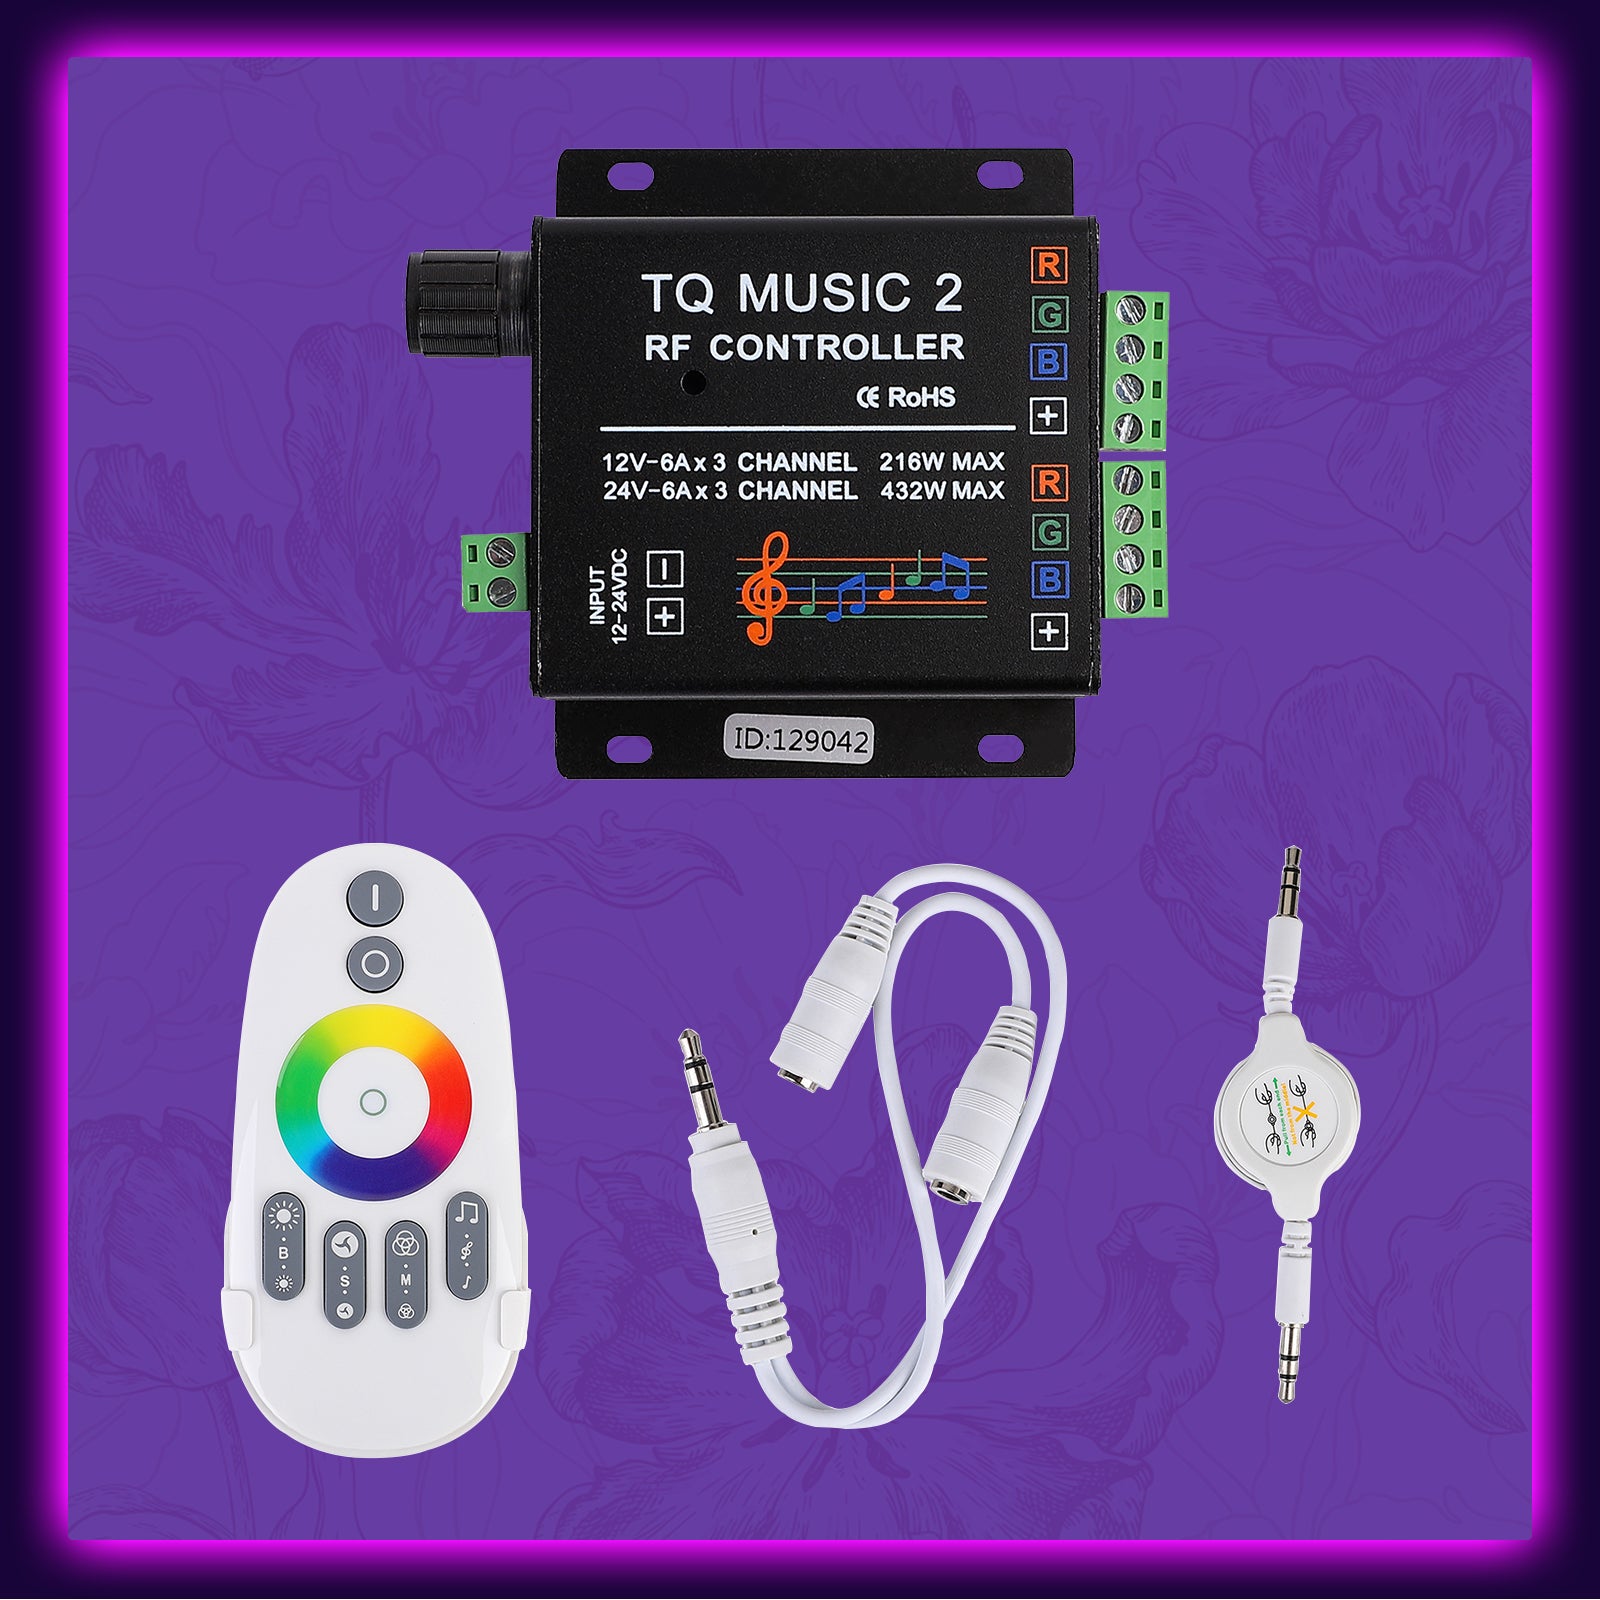 SUPERNIGHT LED RGB Music Touch Controller RF Sensitivety Backlight RF Remote Touching Color 3.5MM Audio 15 Music Modes LED Light Strip Controller